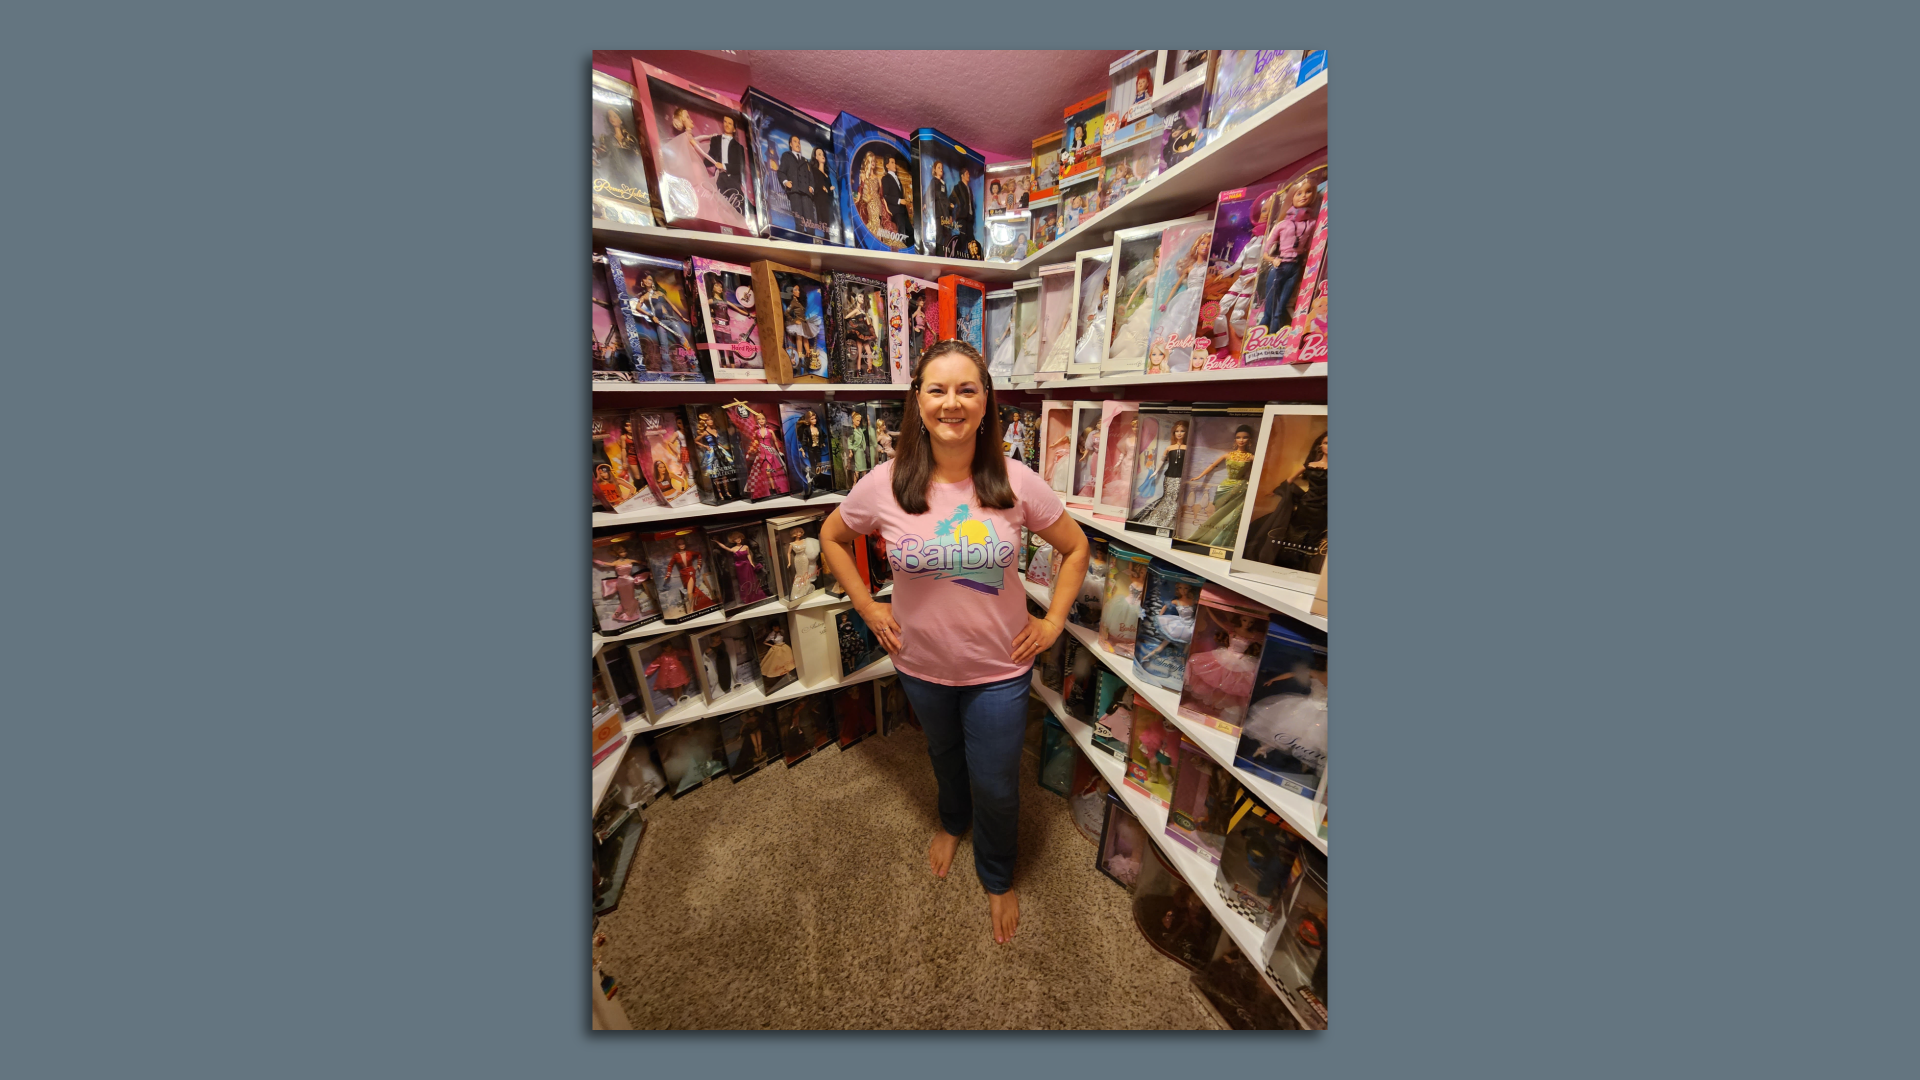 A photo of a woman with a Barbie doll collection.